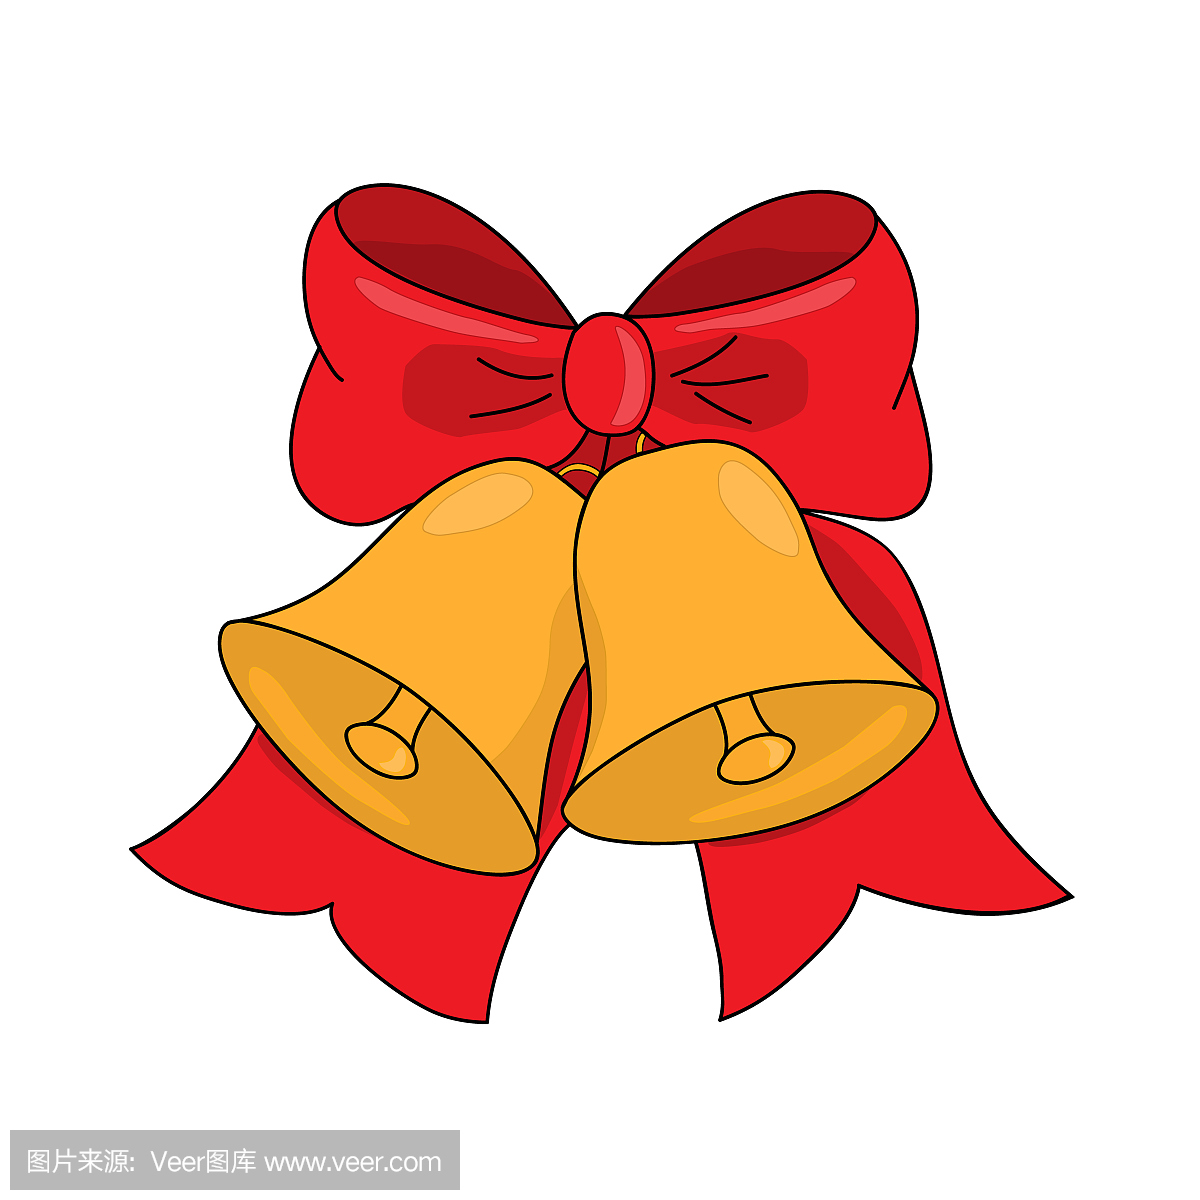 Christmas jingle bells with red bow on a white, v